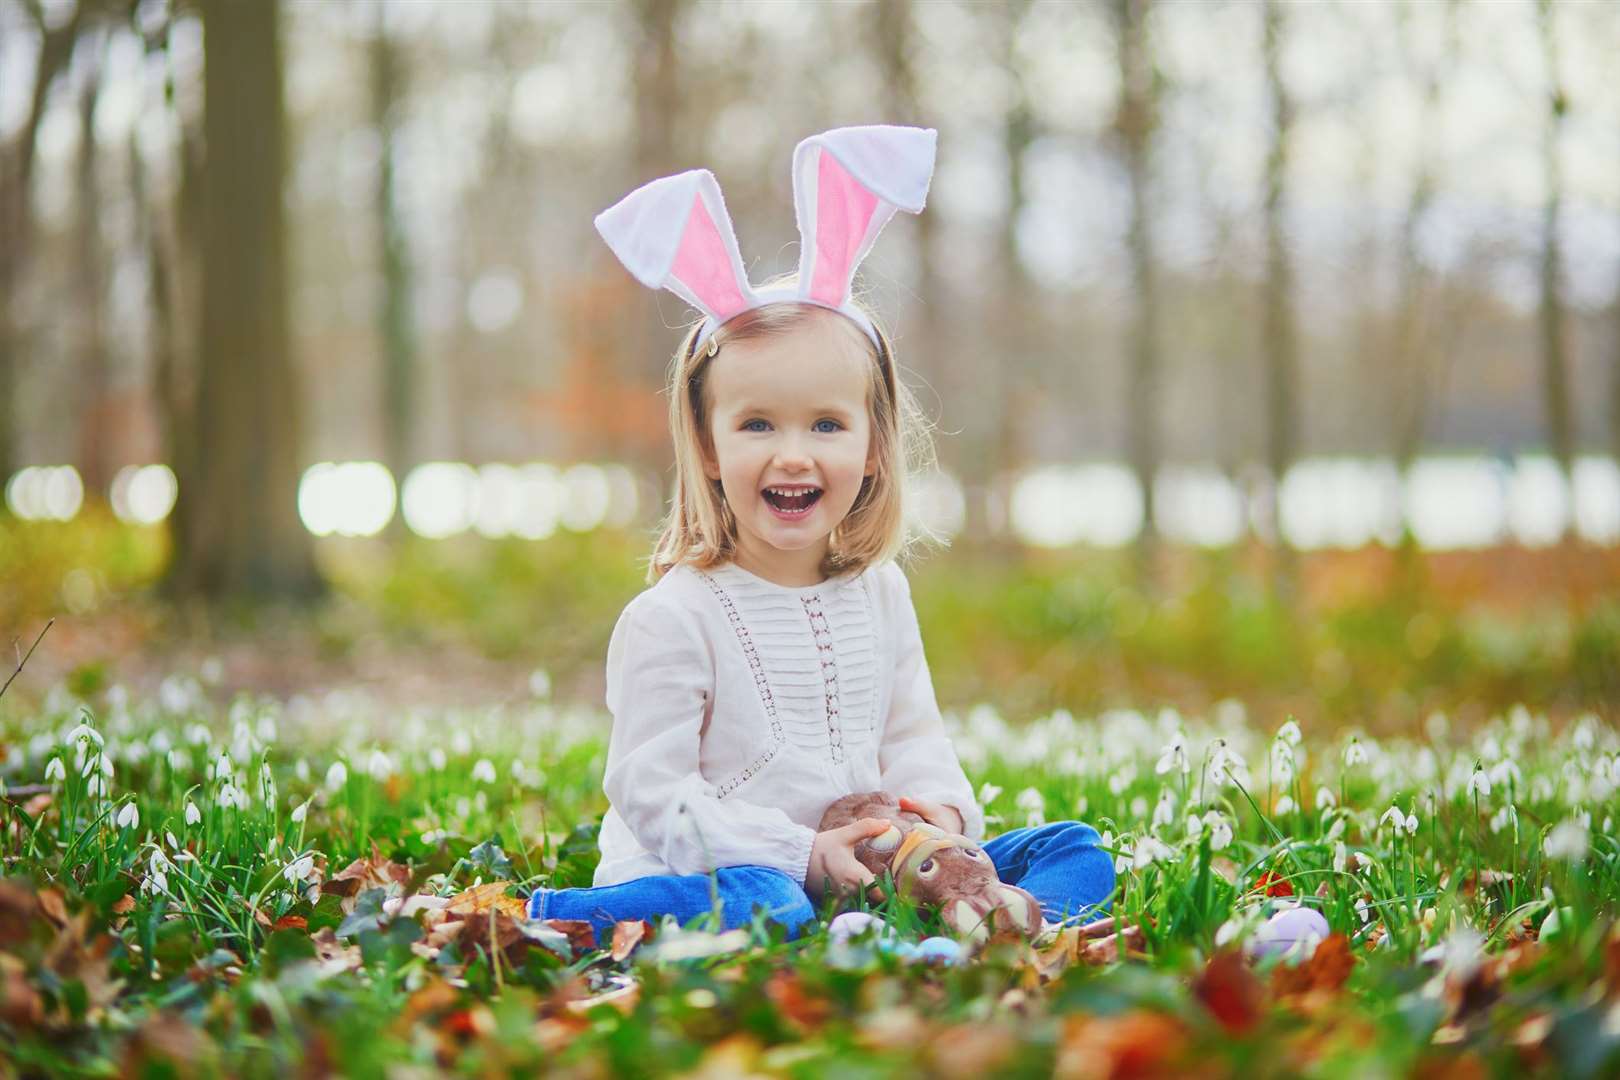 There are a number of events taking place in Kent this Easter